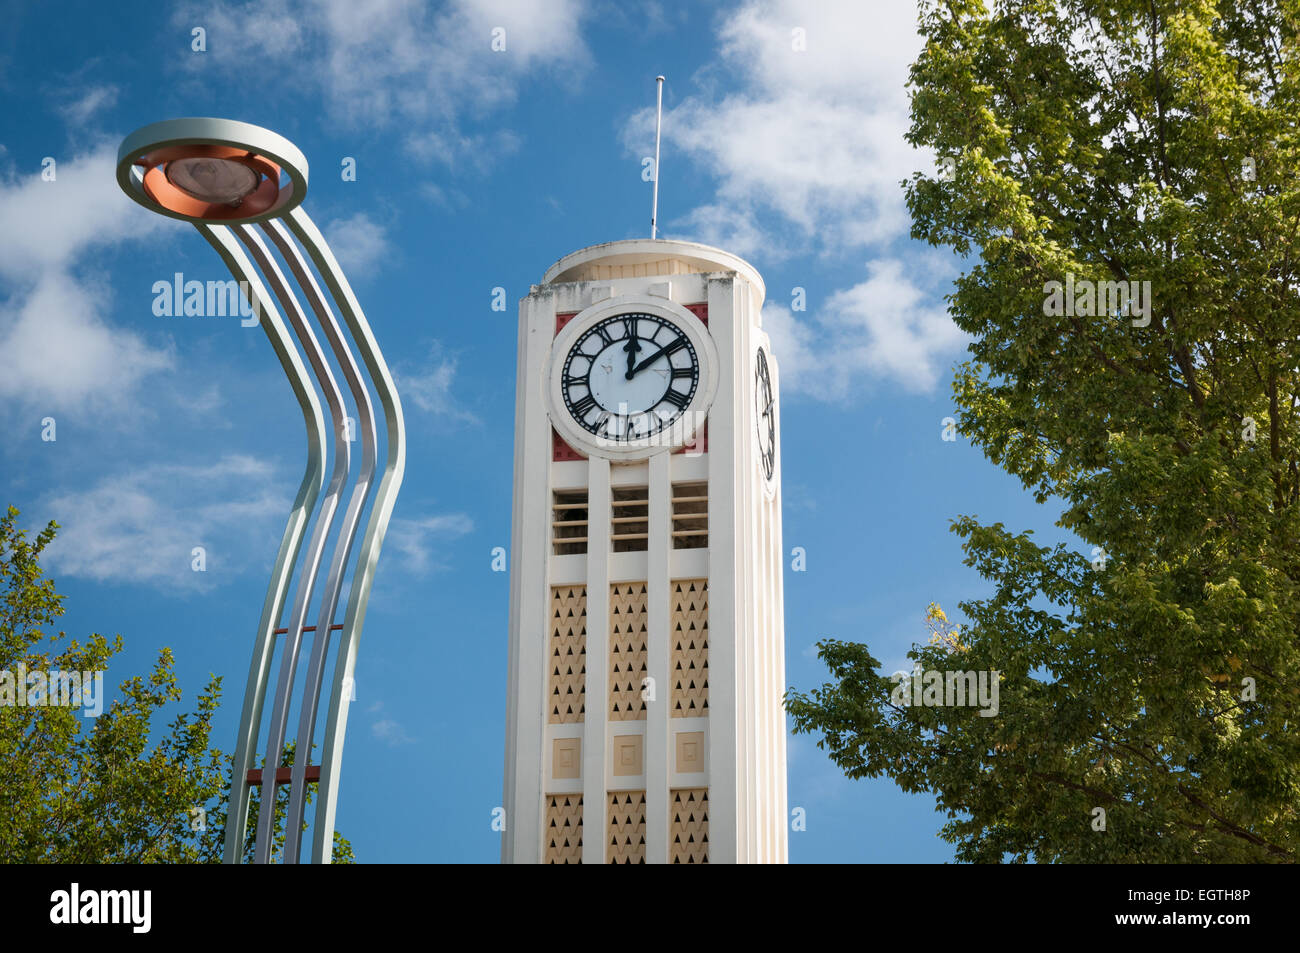 The clock tower, Russel Street North, Hastings, Hawkes Bay, North Island, New Zealand. Stock Photo